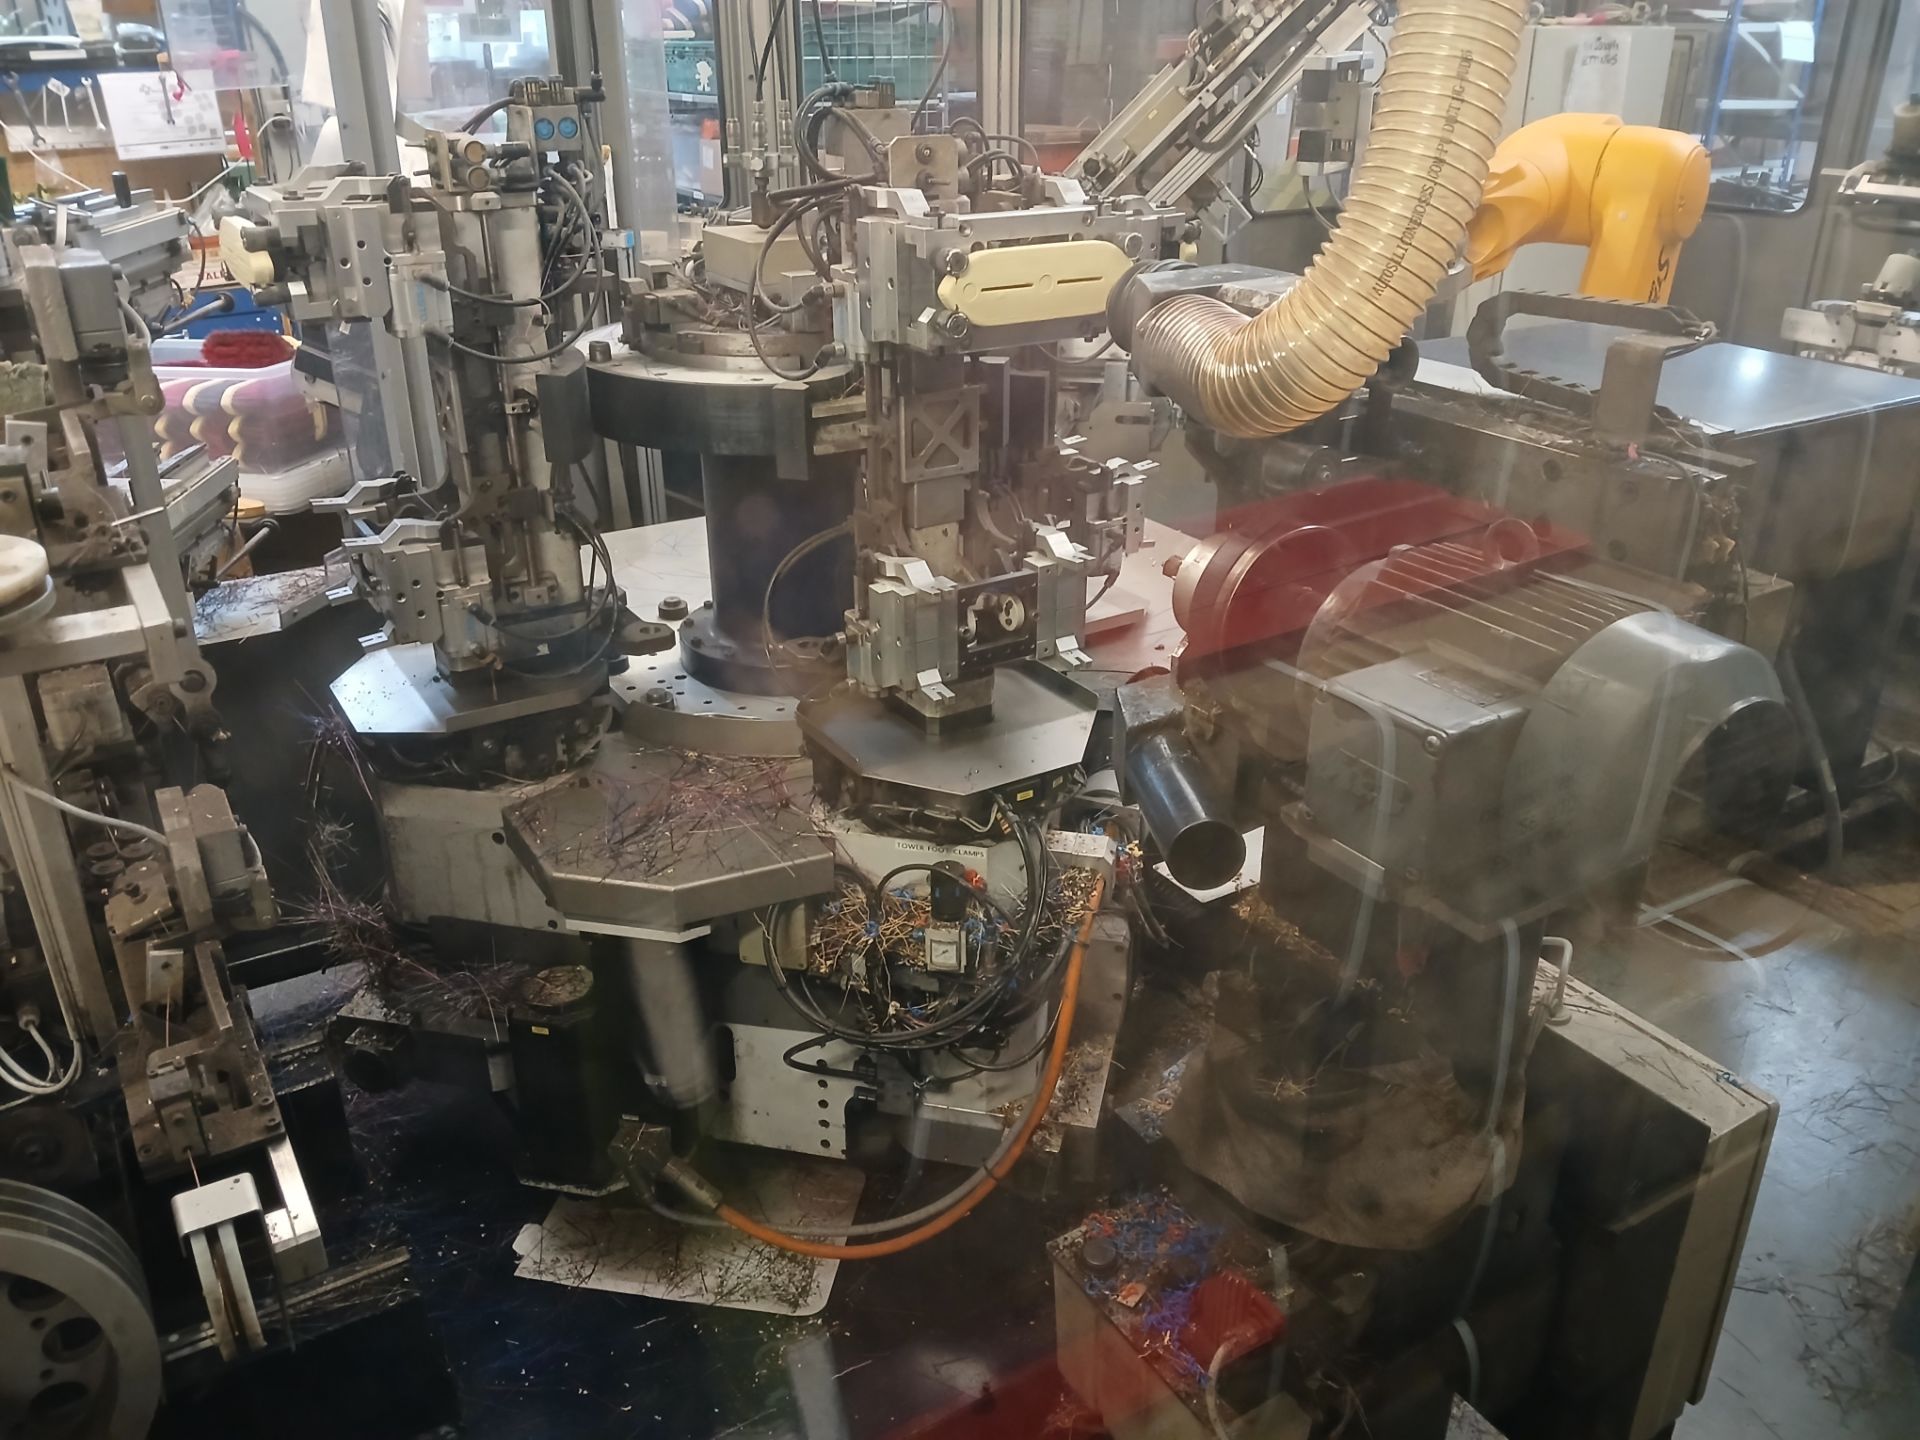 Boucherie TCU-CNC 5 axis robotic brush making machine, Serial number 1655 (2005) with Staubli TX90 - Image 15 of 23